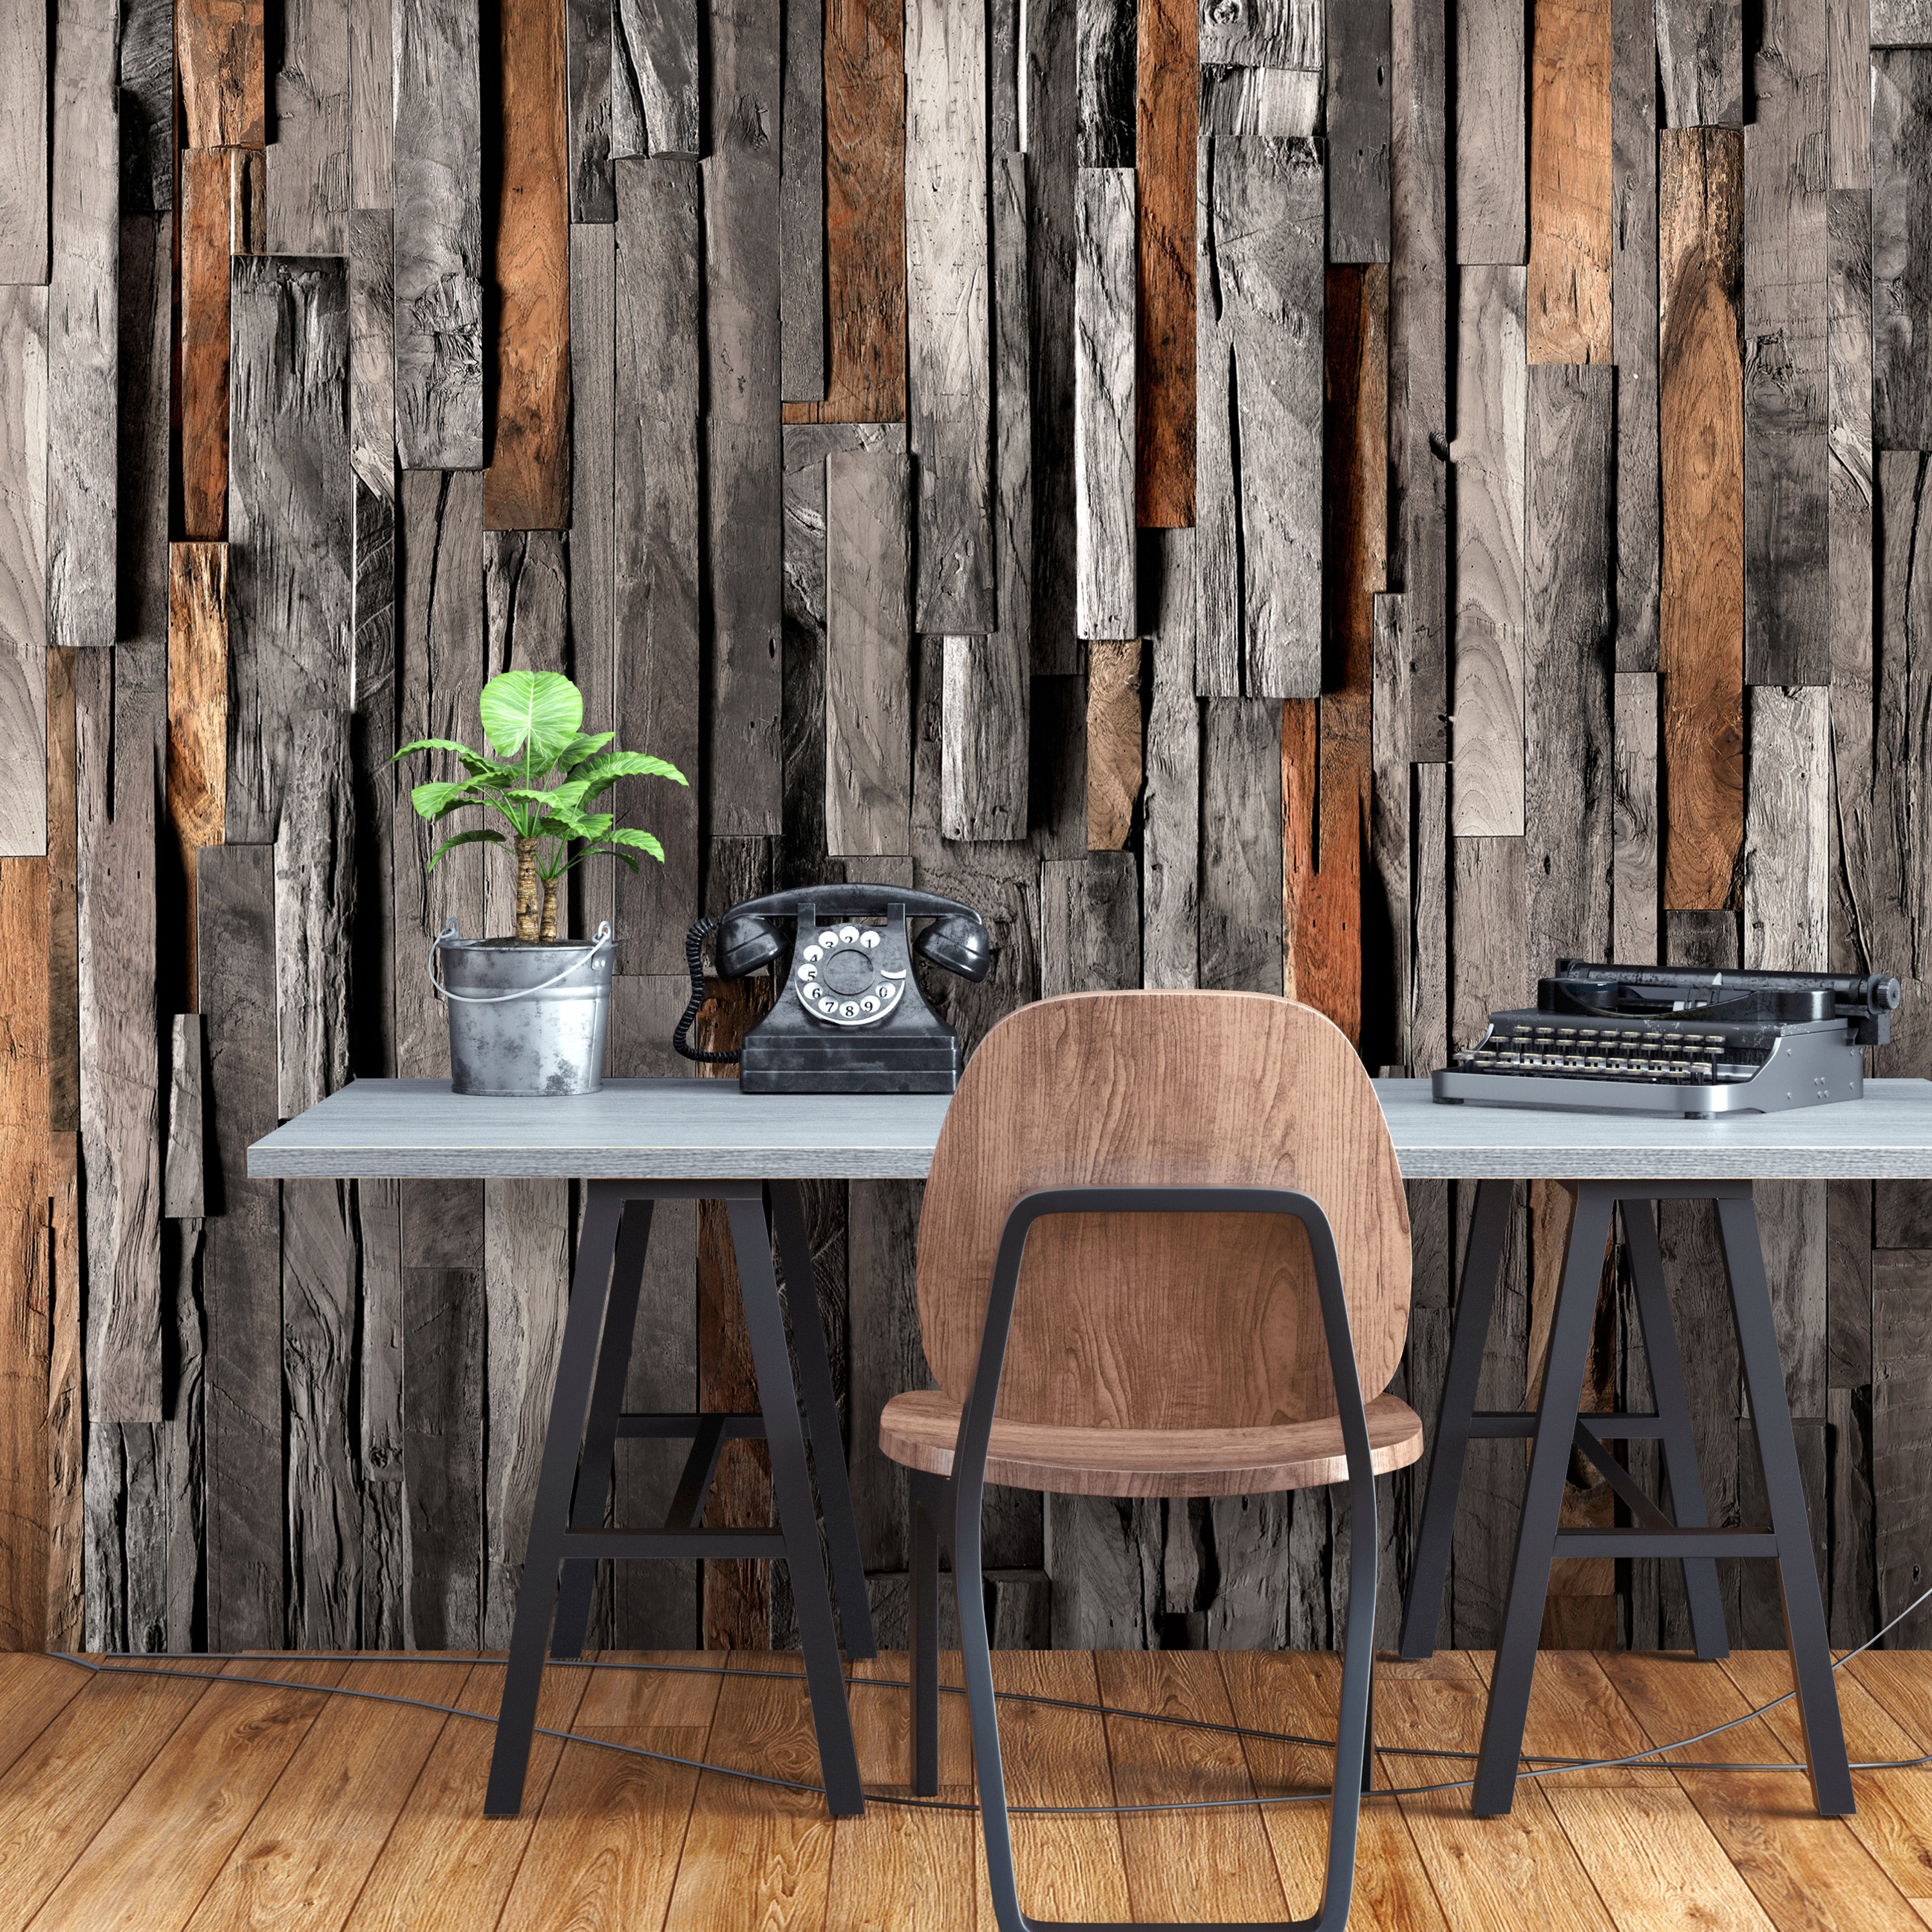 Self-adhesive Wallpaper - Wooden Curtain (Grey and Brown) - 147x105